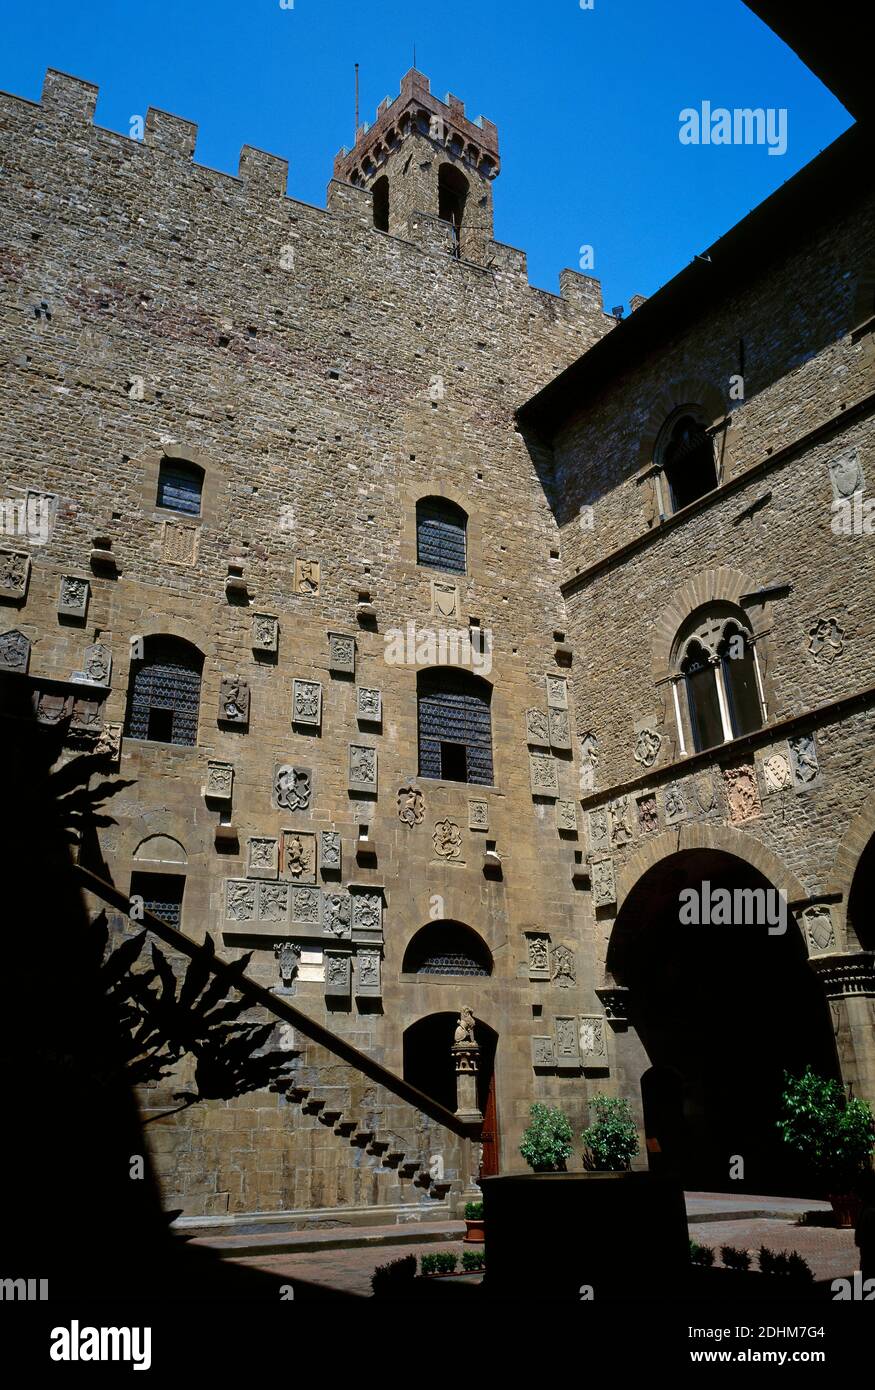 Italy, Tuscany, Florence. Palazzo del Bargello. It houses the Bargello Museum. Medieval building. Its construction is dated in 1255. During the 14th and 15th centuries a series of alterations and addtions took place. Inner courtyard. Stock Photo